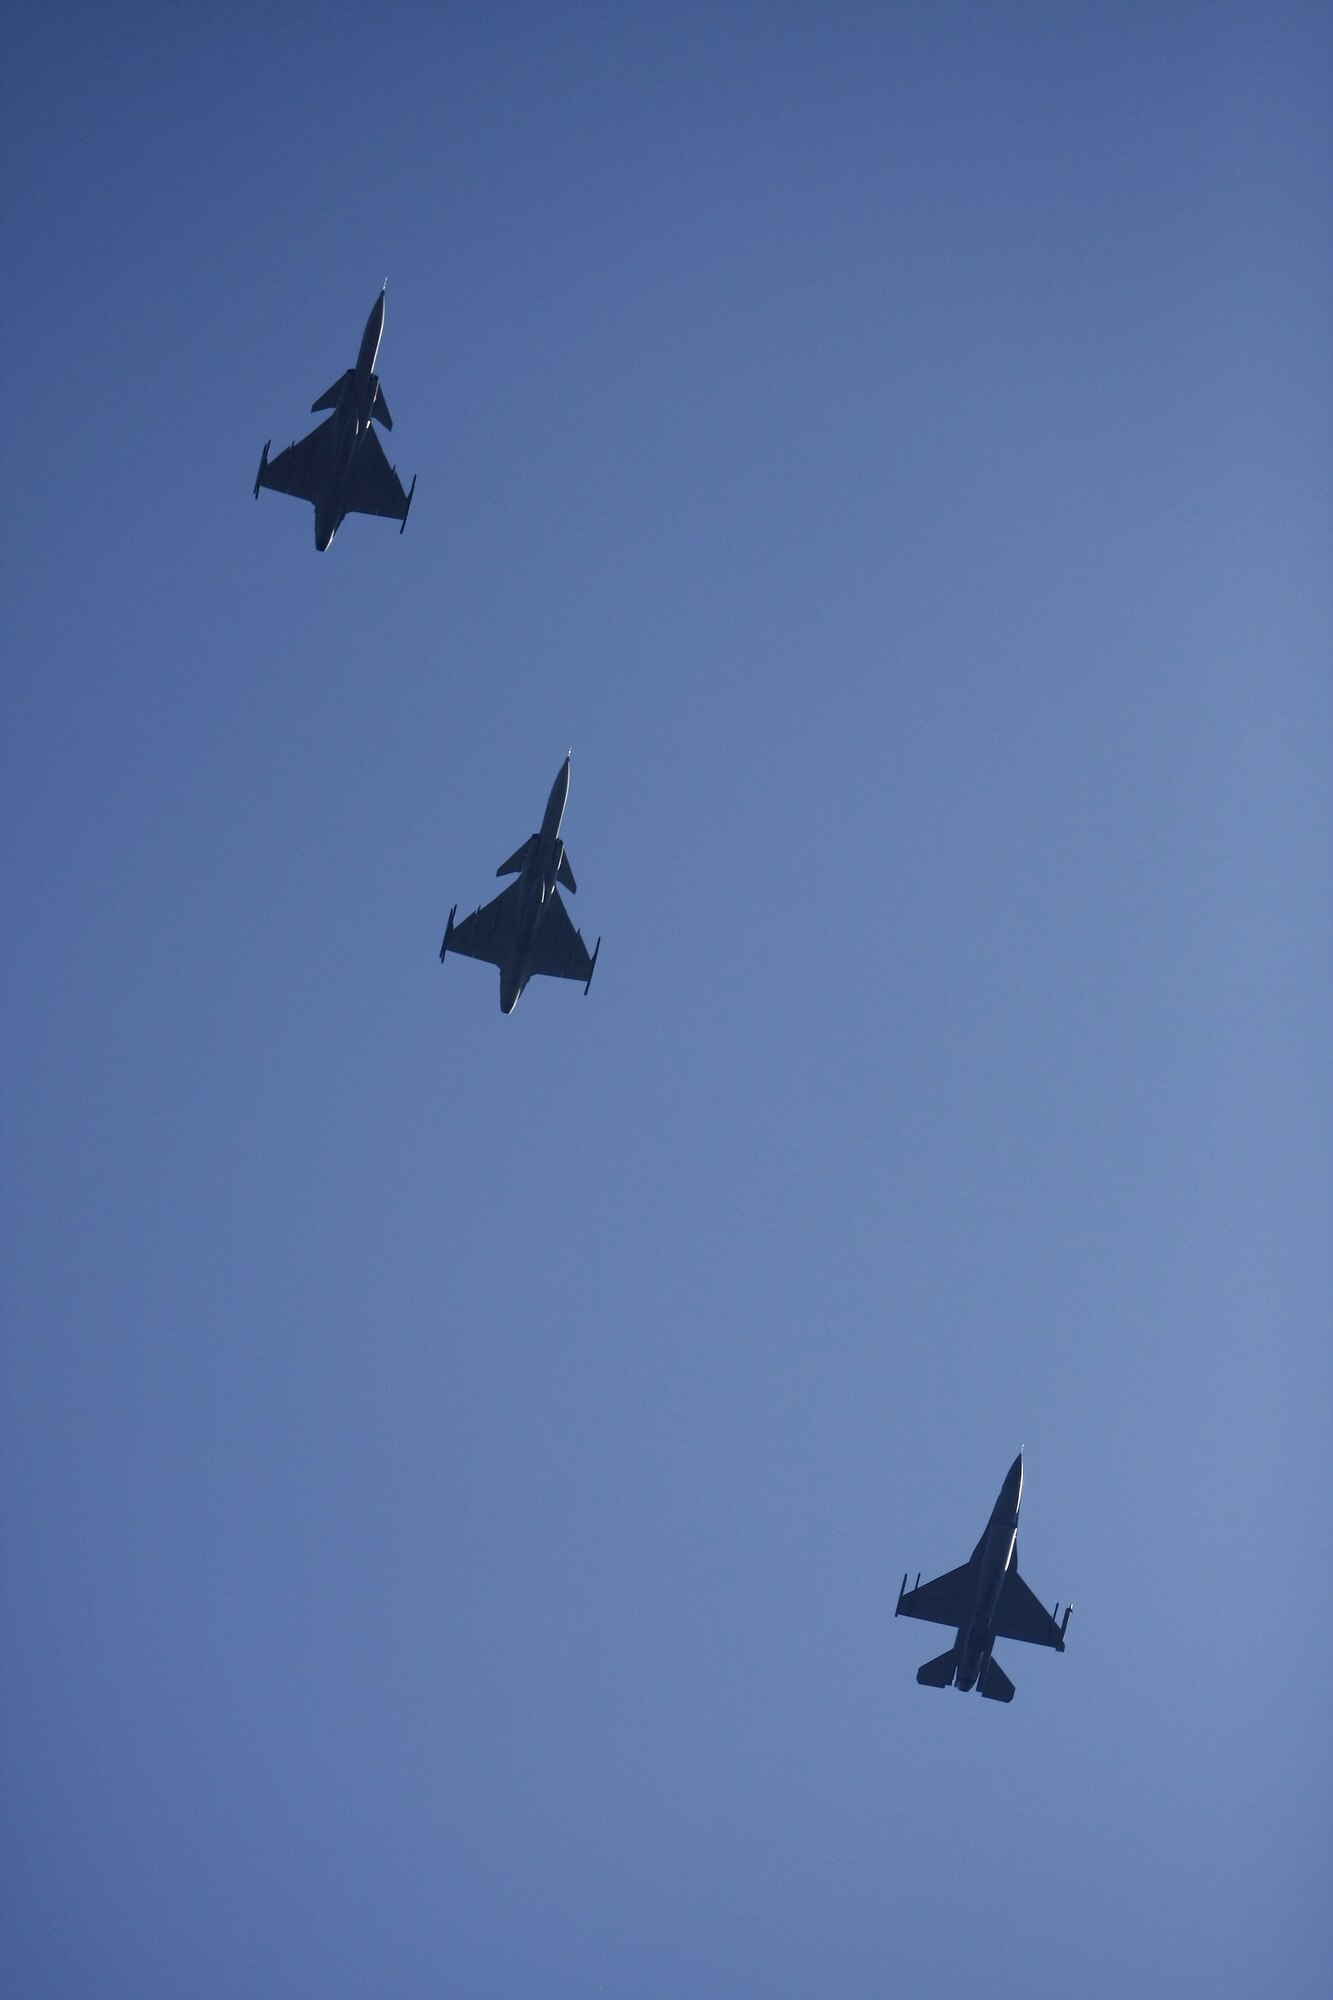 Two Czech Grippens and an F-16 cast silhouettes as the fly over Caslav Air Base.   Members of the Texas Air National Guard’s 149th Fighter Wing were in the Czech Republic conducting mutual training as part of the National Guard’s state partnership program.  (U.S. Air Force photo by Capt Randy Saldivar)